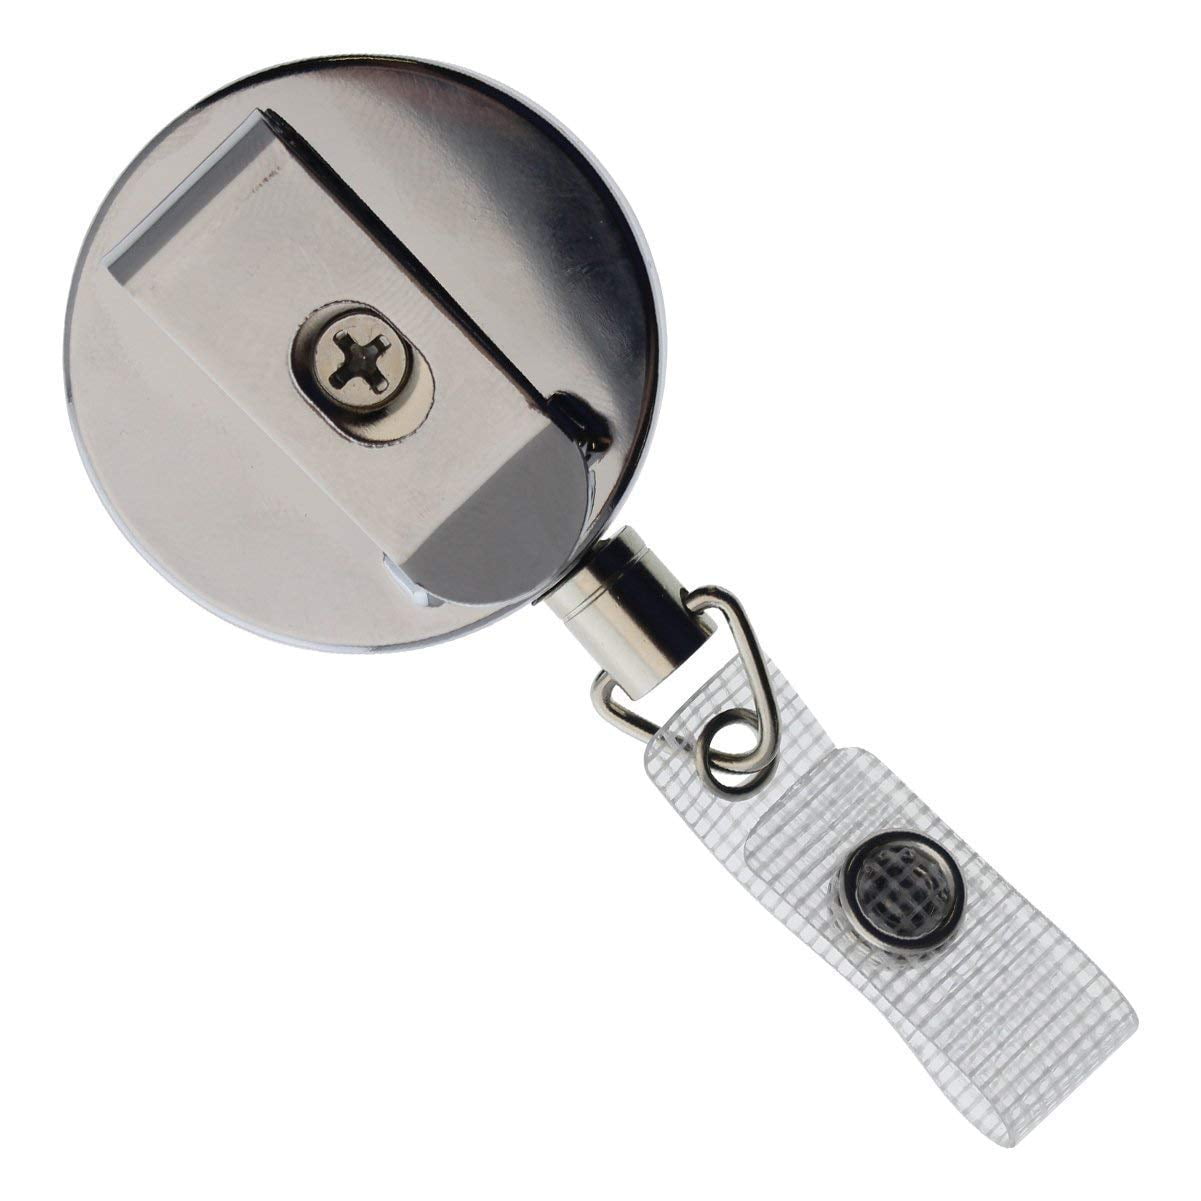 Heavy Duty Badge Reel with Metal Cord and Belt Clip - All Metal